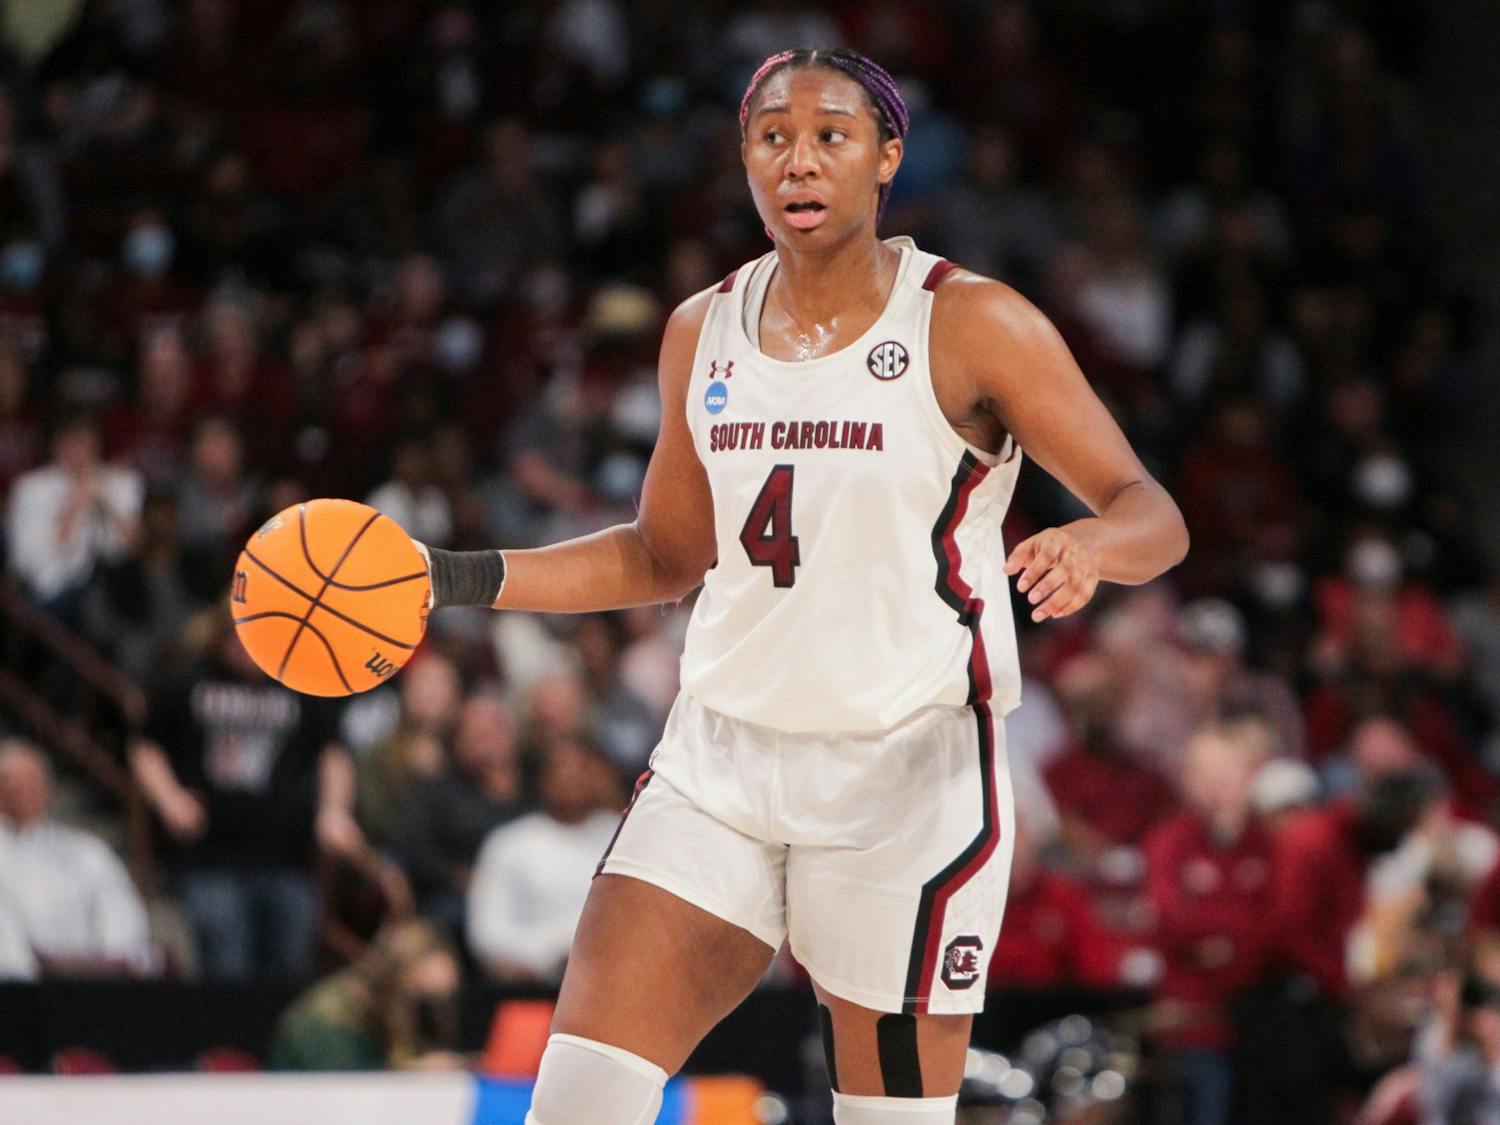 Junior forward Aliyah Boston dribbles the ball down the court during a second round game of the NCAA tournament on Sunday, March 20, 2022 at the Colonial Life Arena. The Gamecocks beat Miami 49-33.